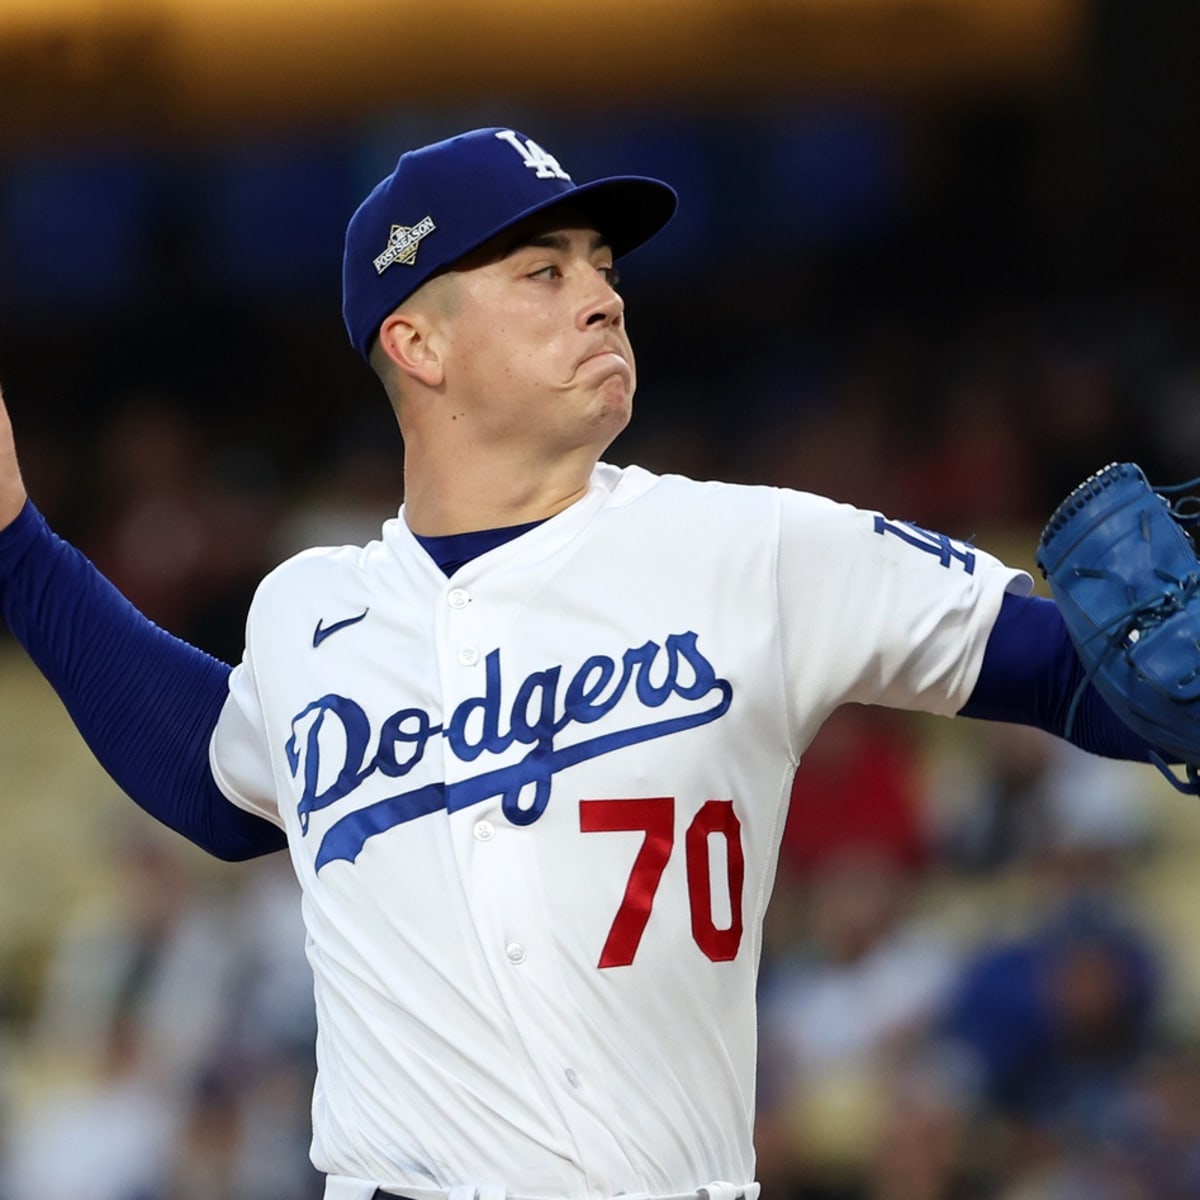 MLB Network - The Los Angeles Dodgers are adding a big